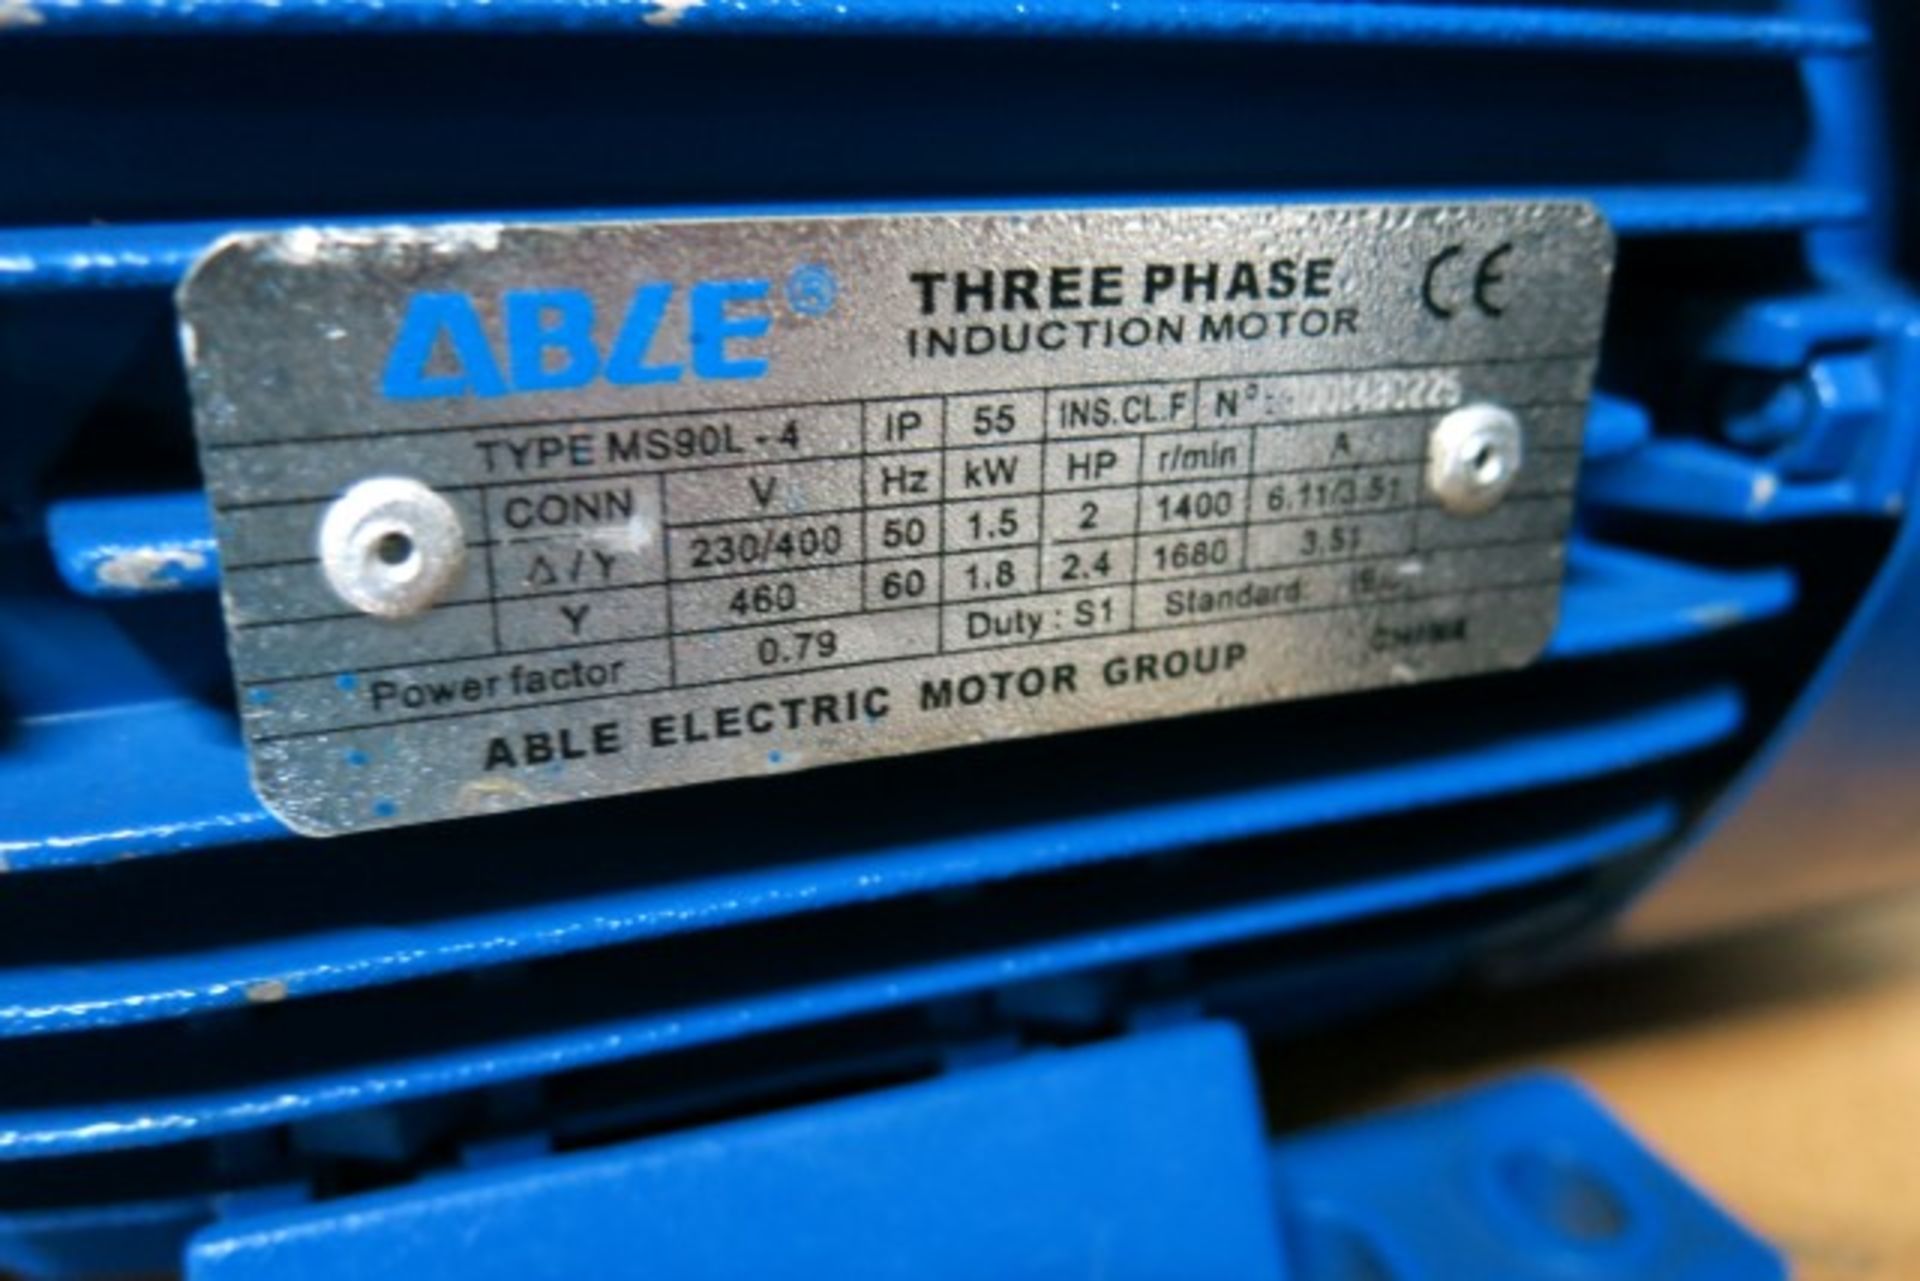 Able Type: MS902-4 induction motor 3PH - Image 2 of 2